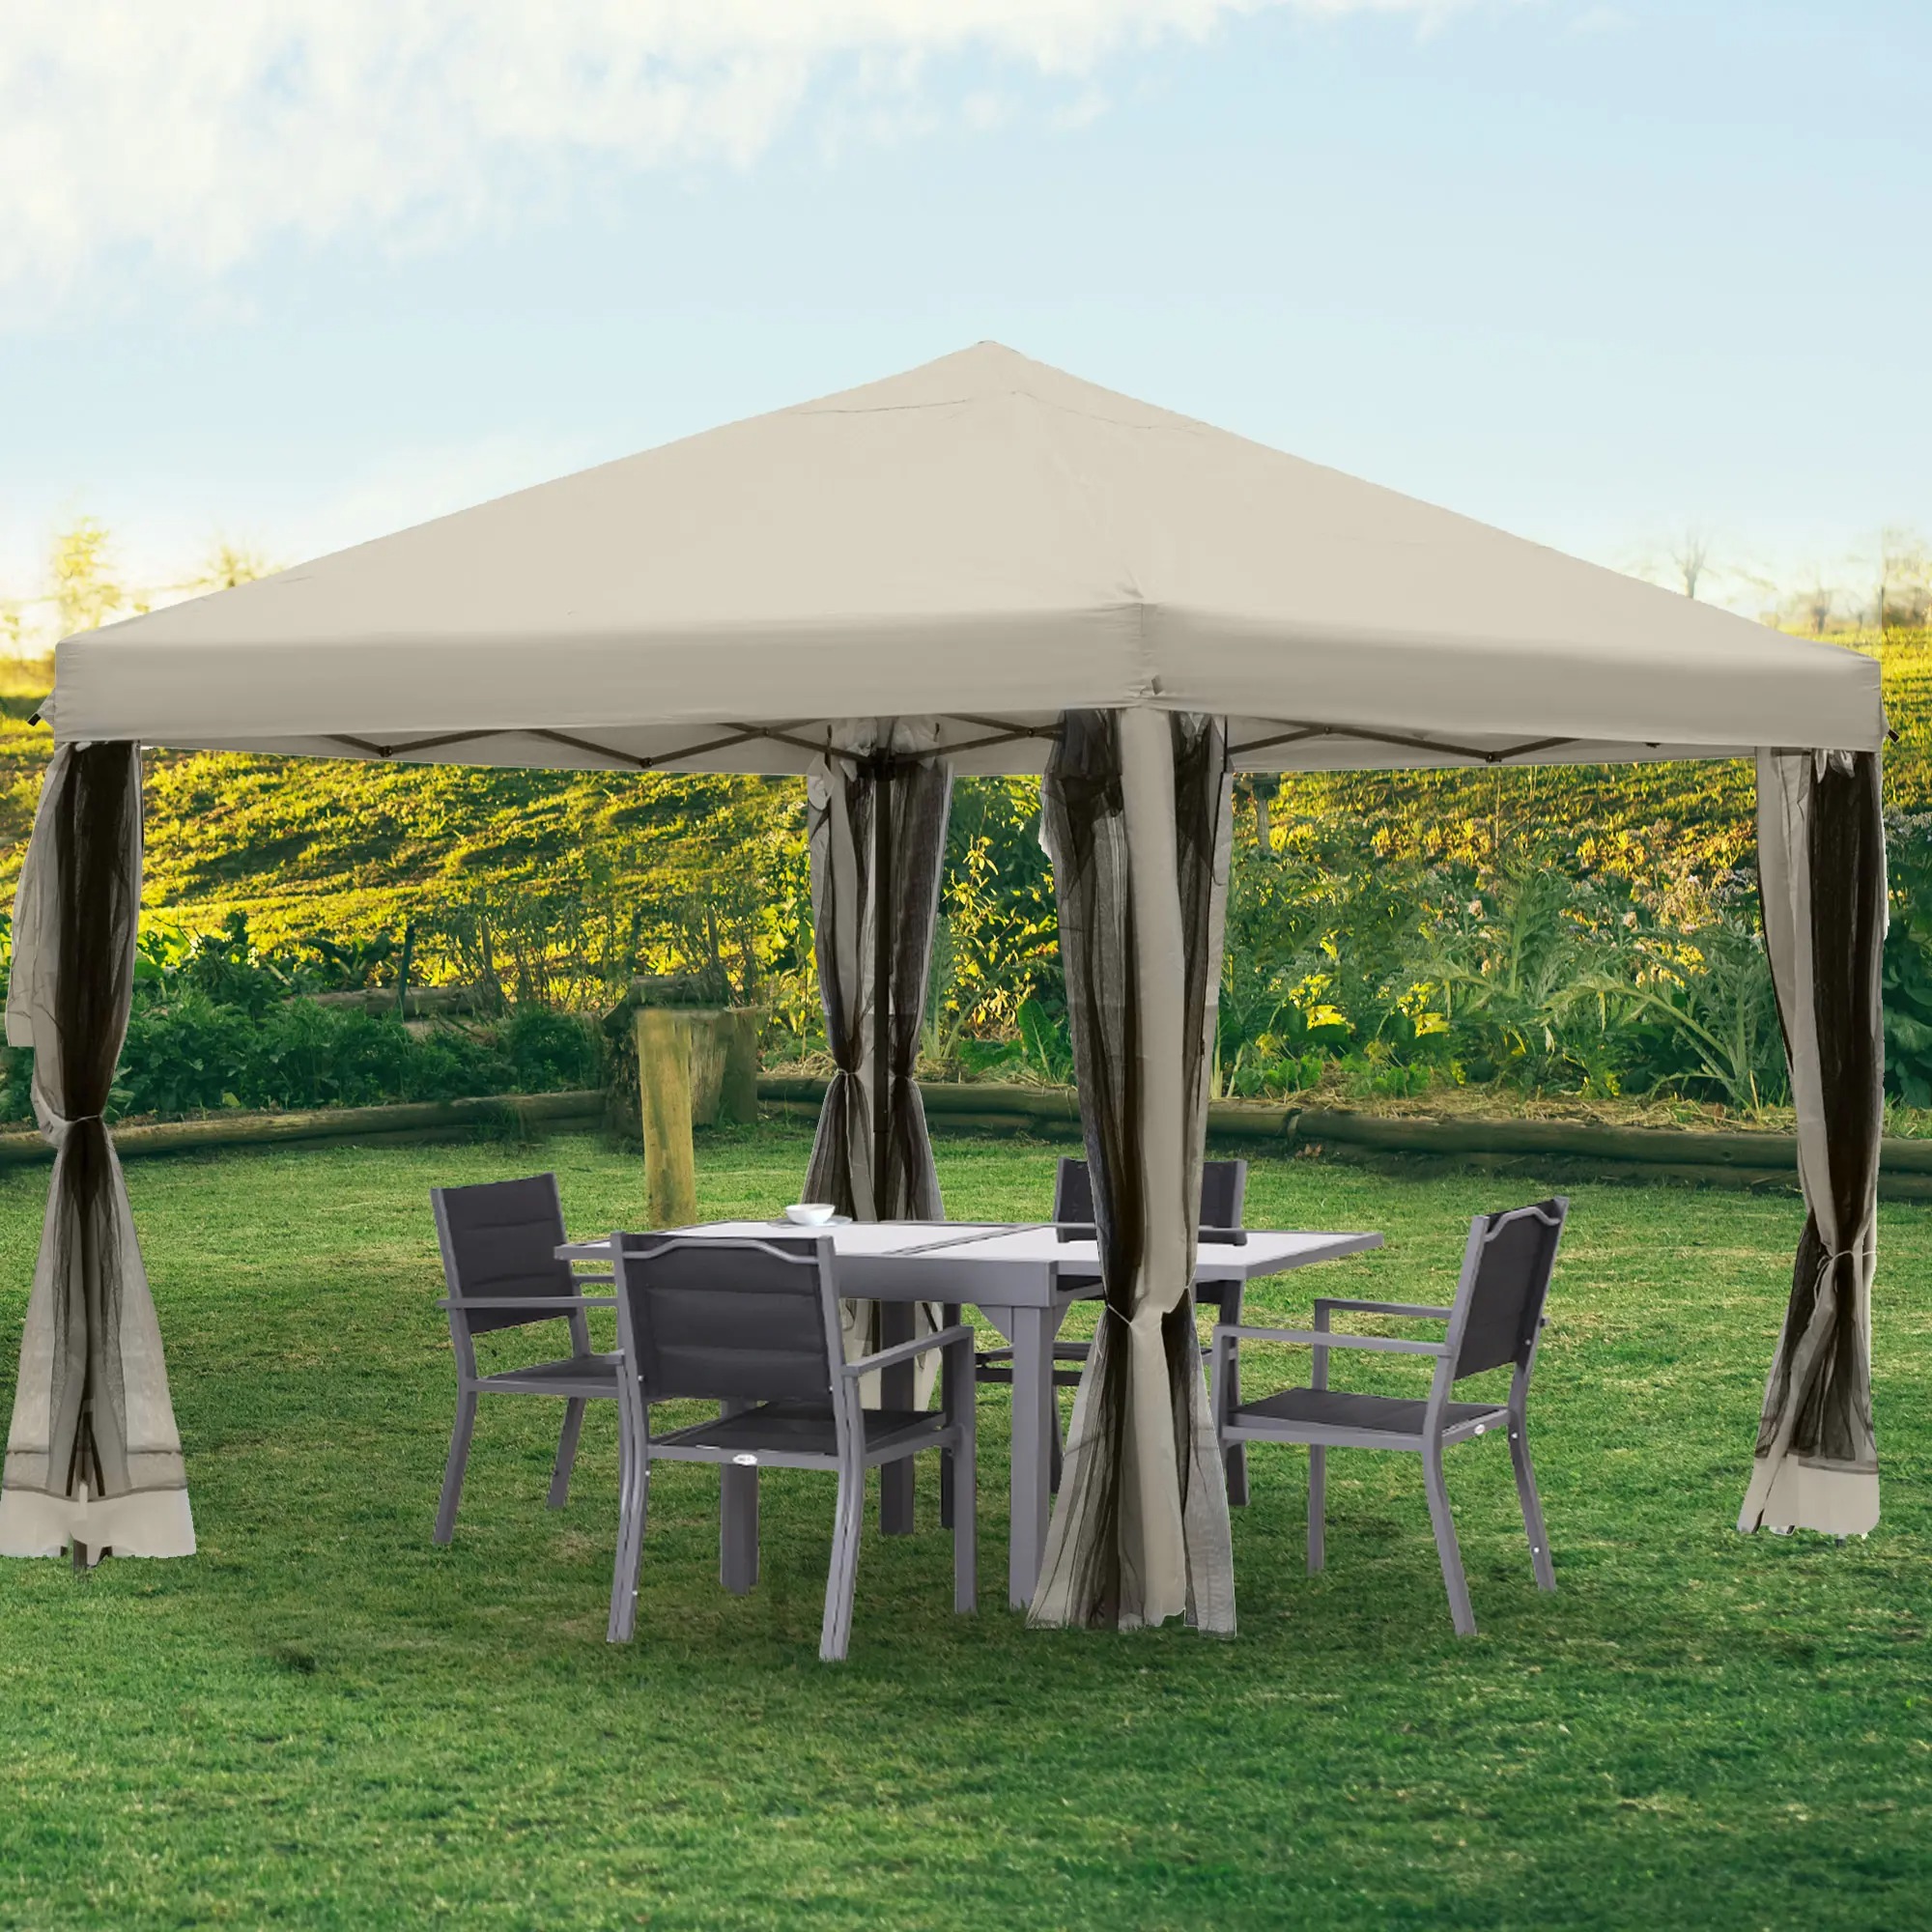 Outsunny 10' x 10' Pop-Up Canopy Party Tent Gazebo - UV Protected w/ Mesh Wall